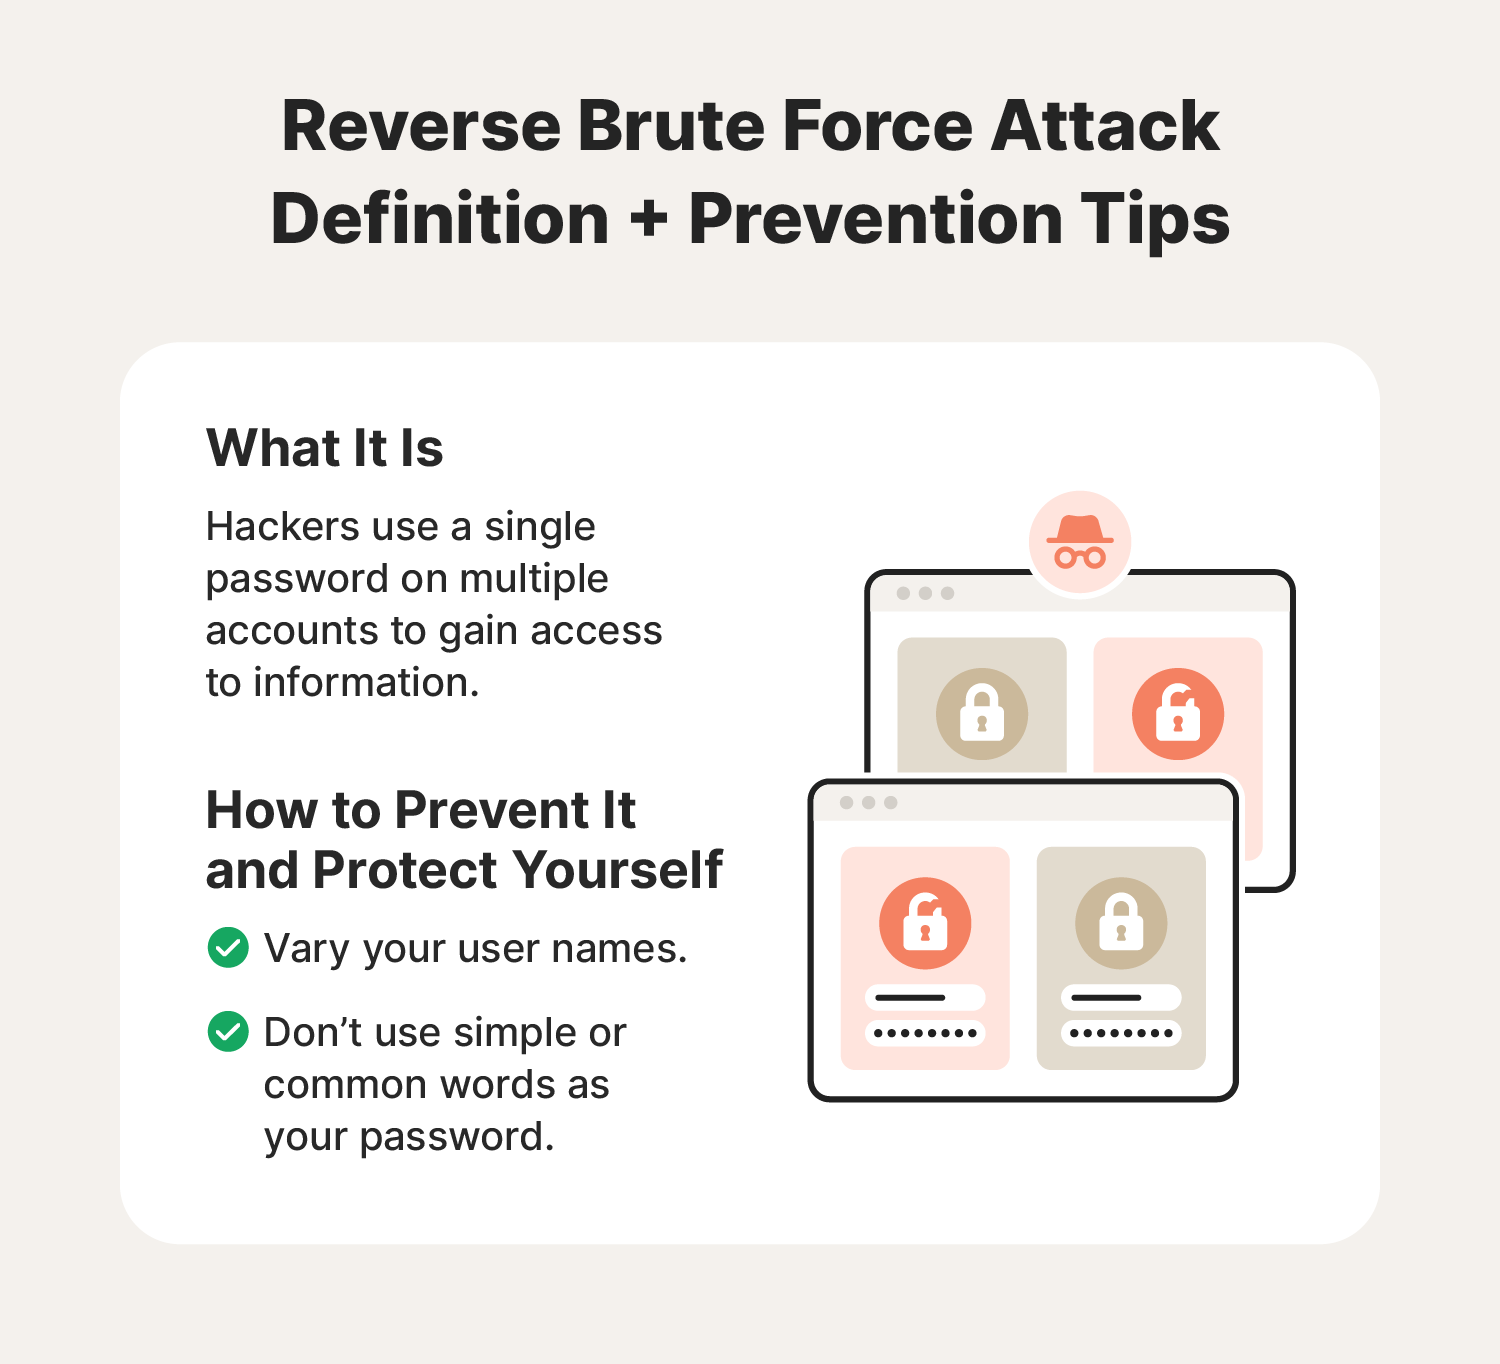 Illustrated chart defining reverse brute force attacks with prevention and protection tips.